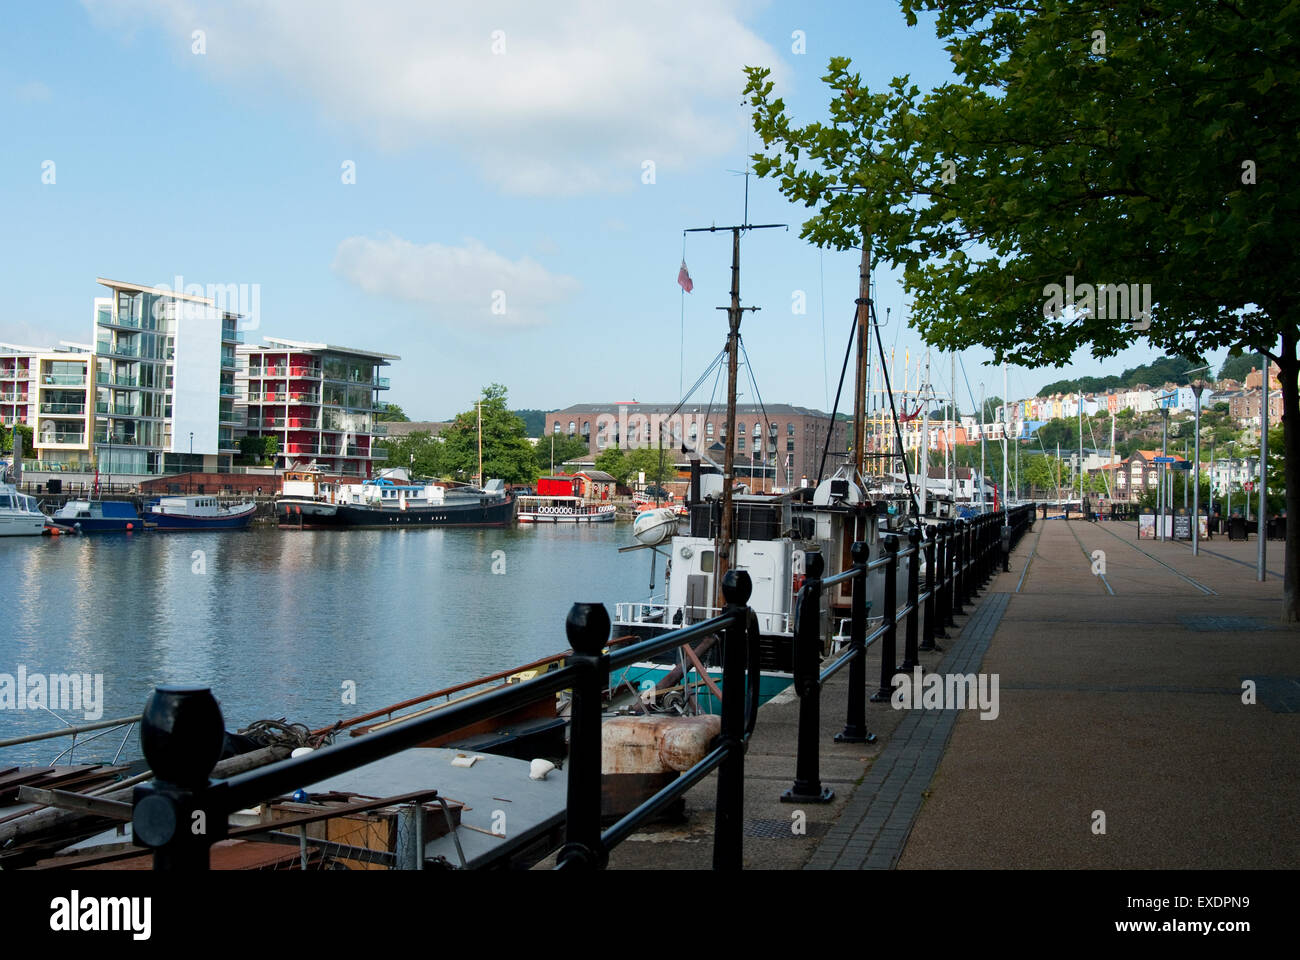 Documentary images of Bristol Harbourside showing boats docked in the water with waterside development in the background. Stock Photo